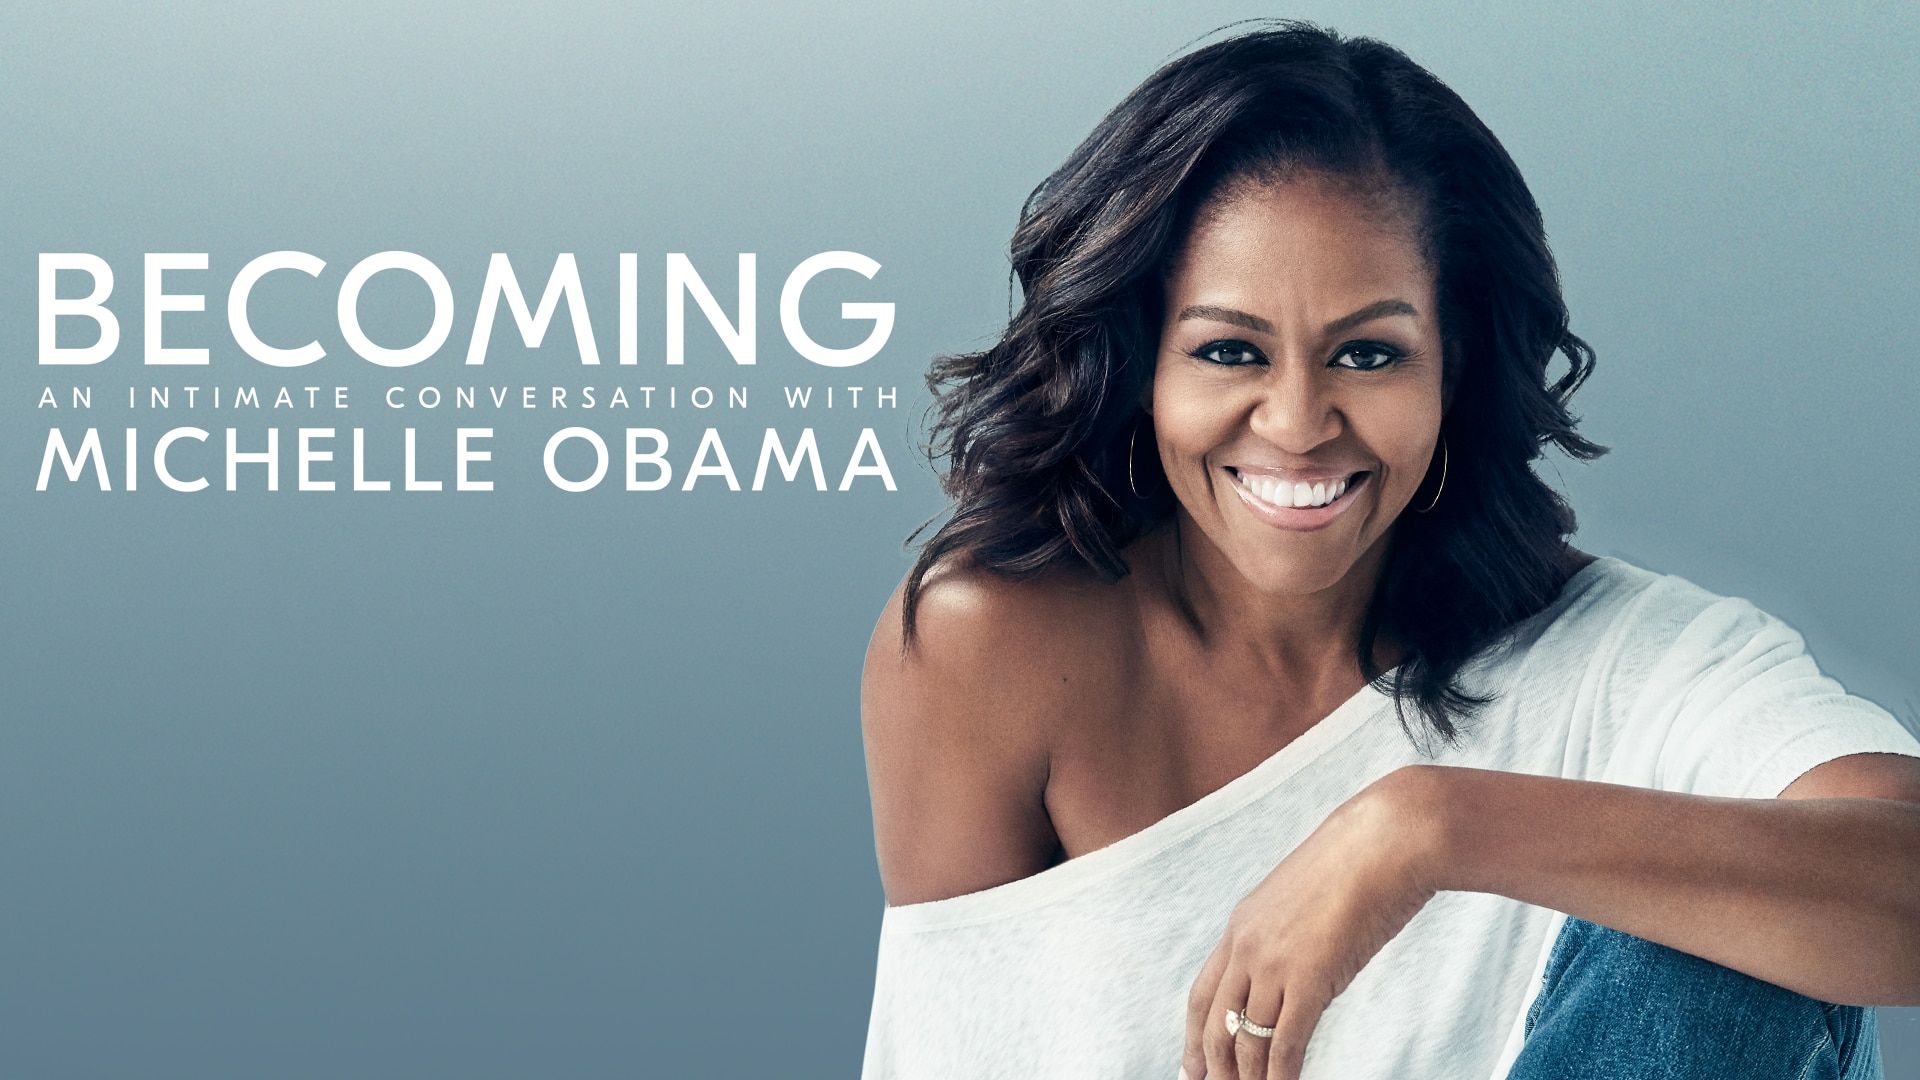 Michelle Obama's 'Becoming' also about belonging